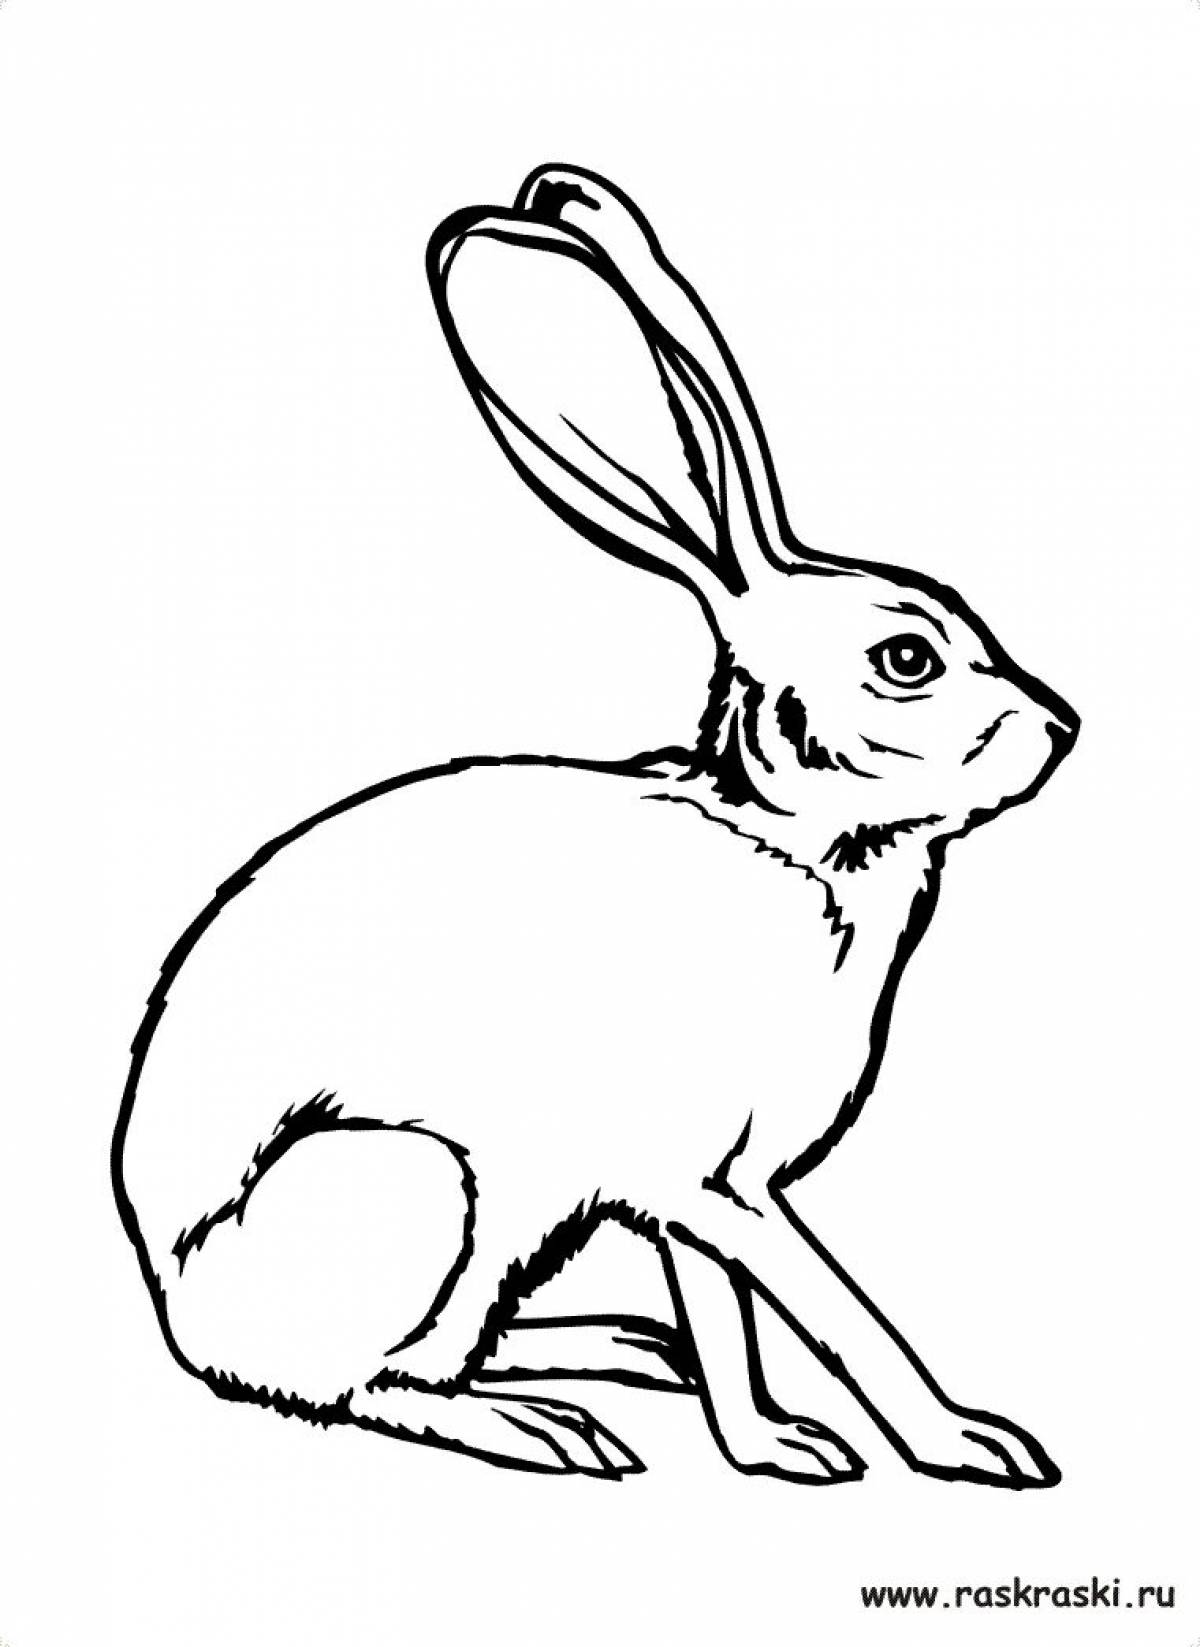 Coloring hare for kids